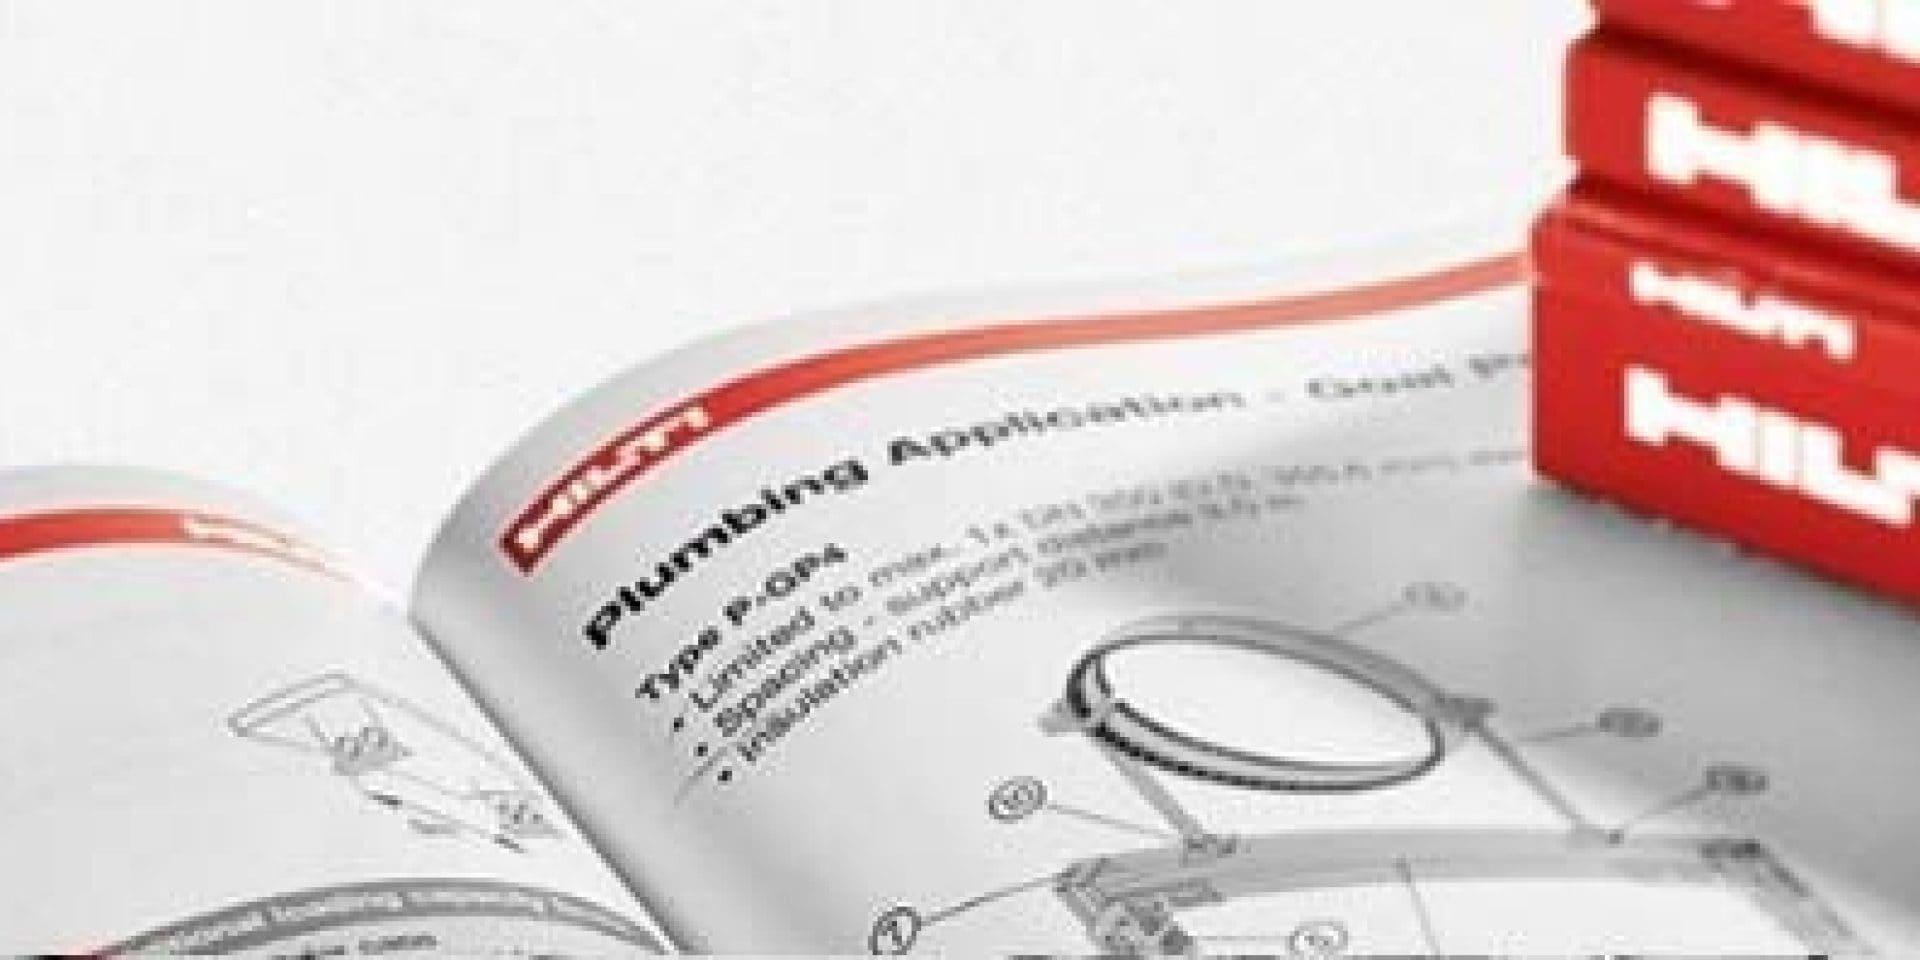 Hilti technical literature for engineers